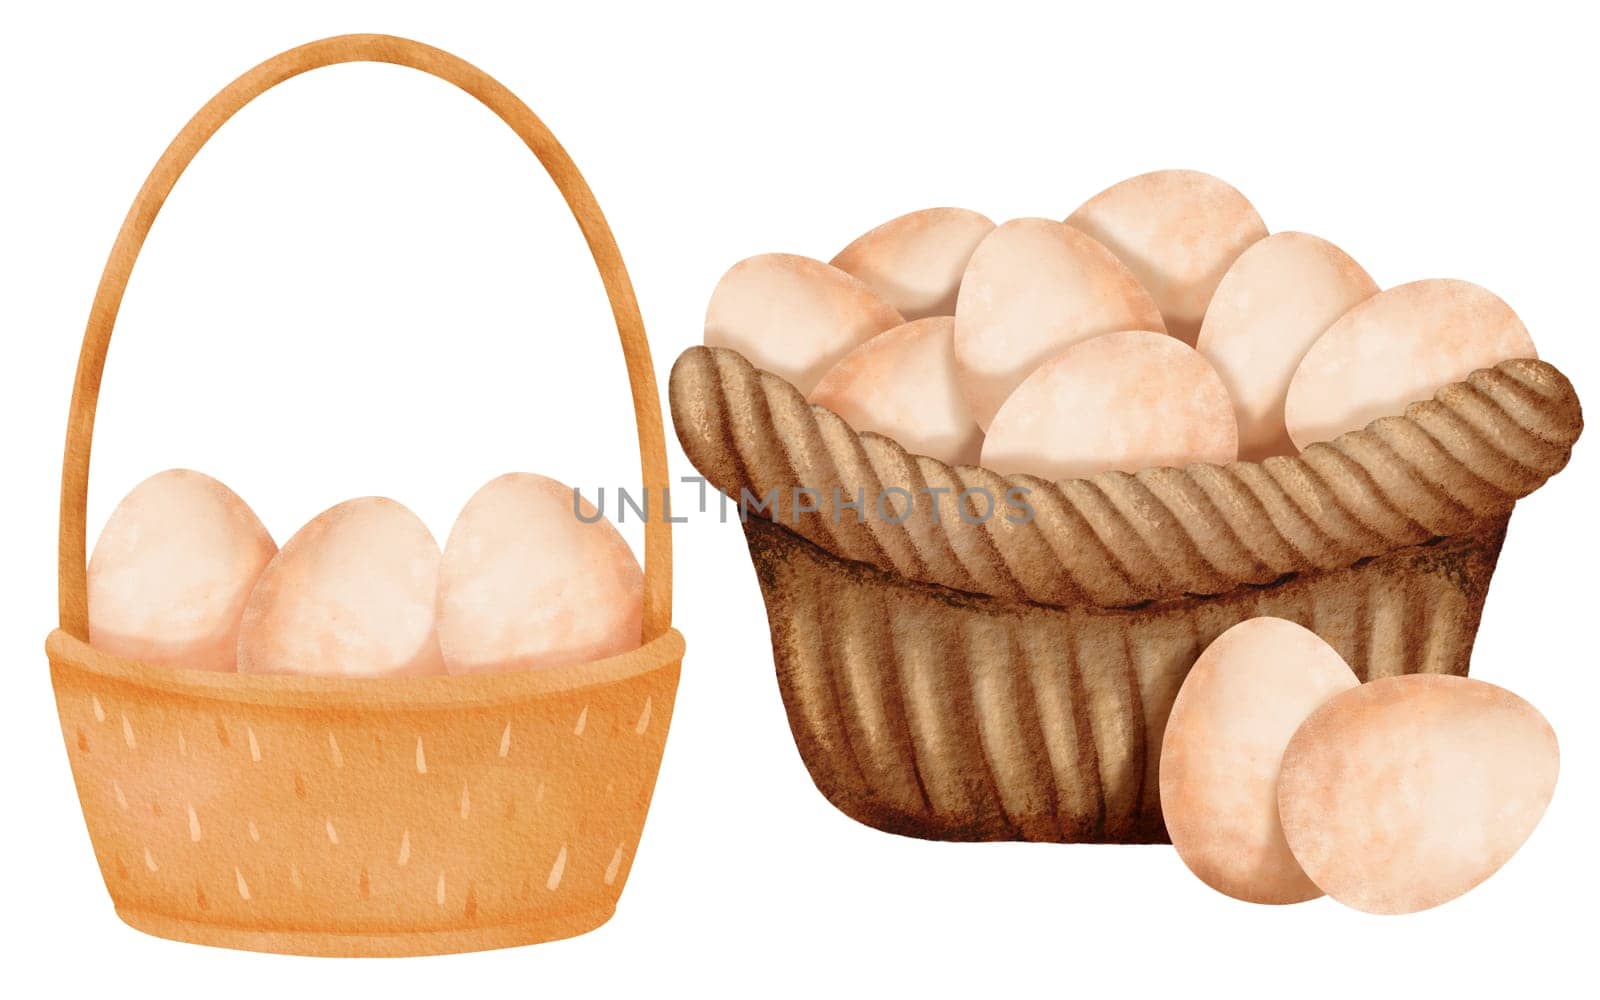 Watercolor set featuring two distinct woven baskets filled with fresh eggs. Captures the rustic beauty of farm-fresh simplicity. for conveying a wholesome atmosphere. for diverse designs, cards by Art_Mari_Ka